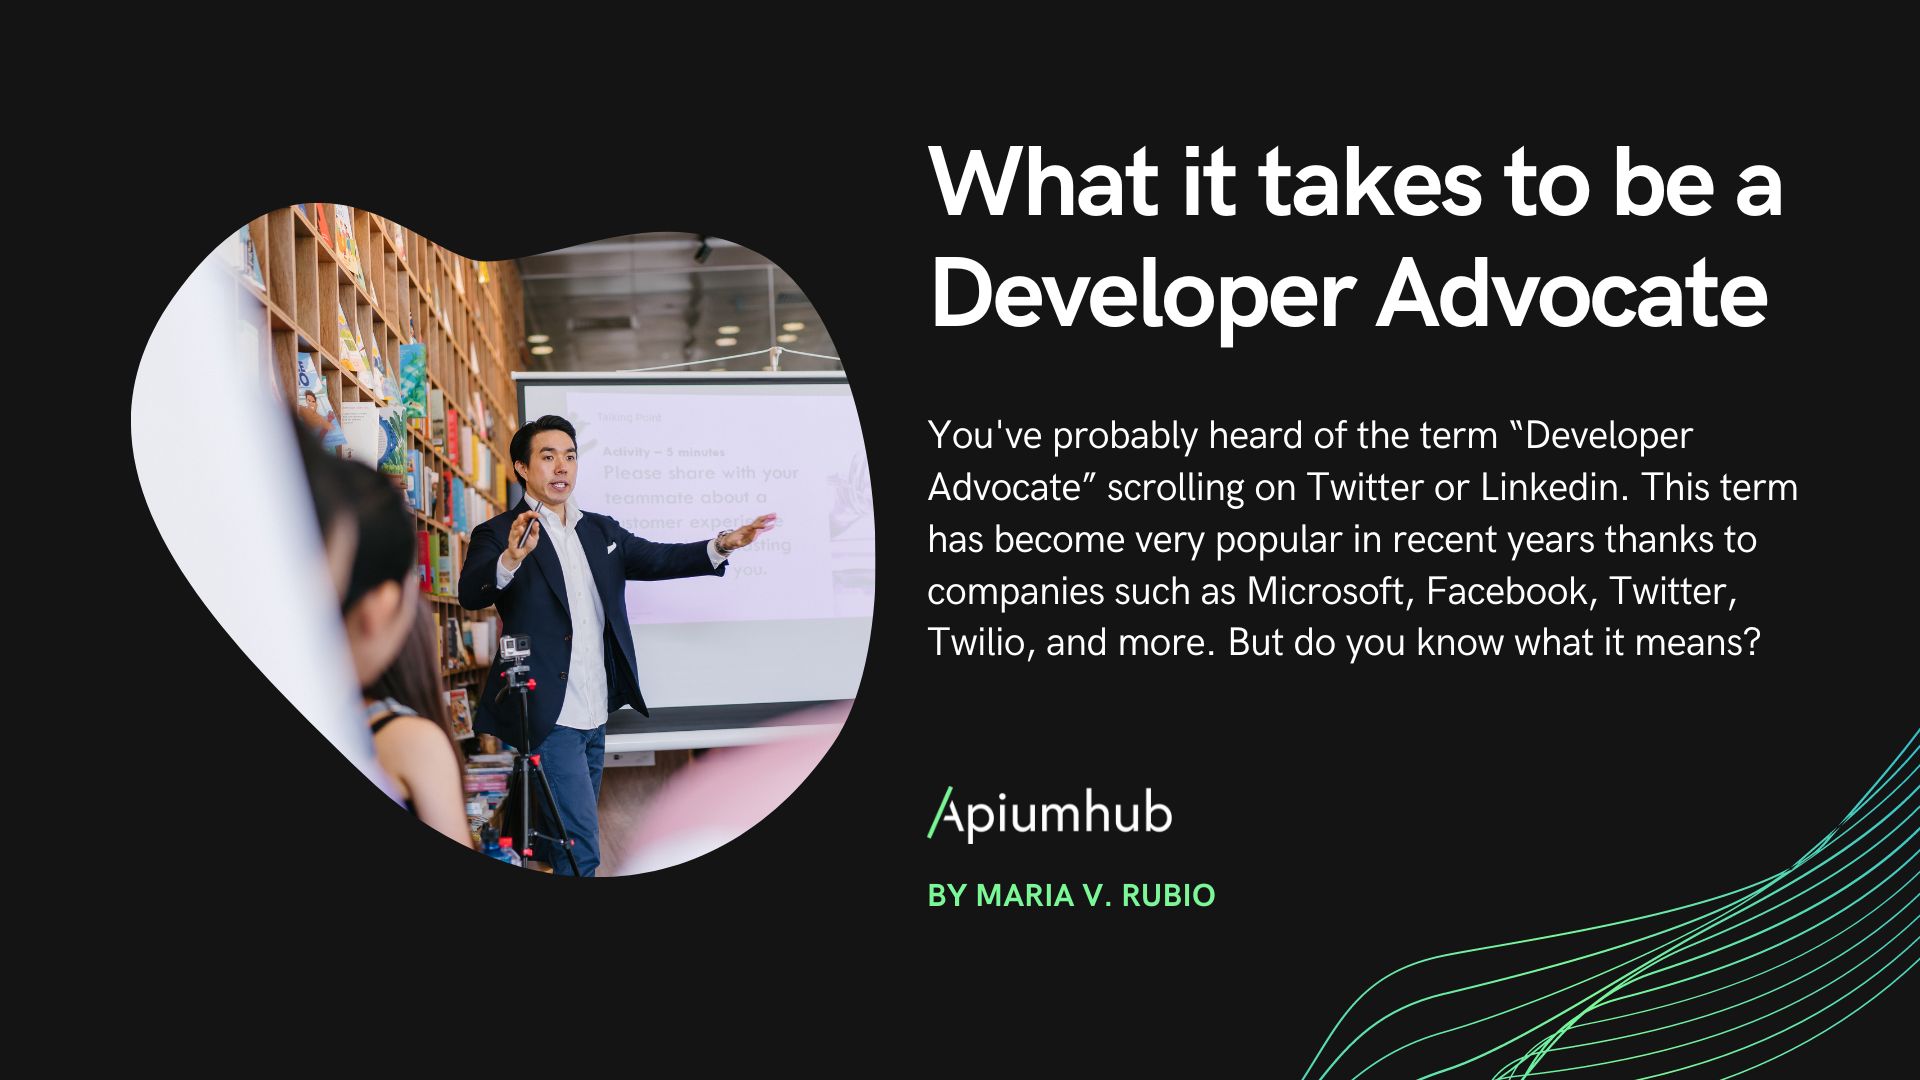 What it takes to be a developer advocate